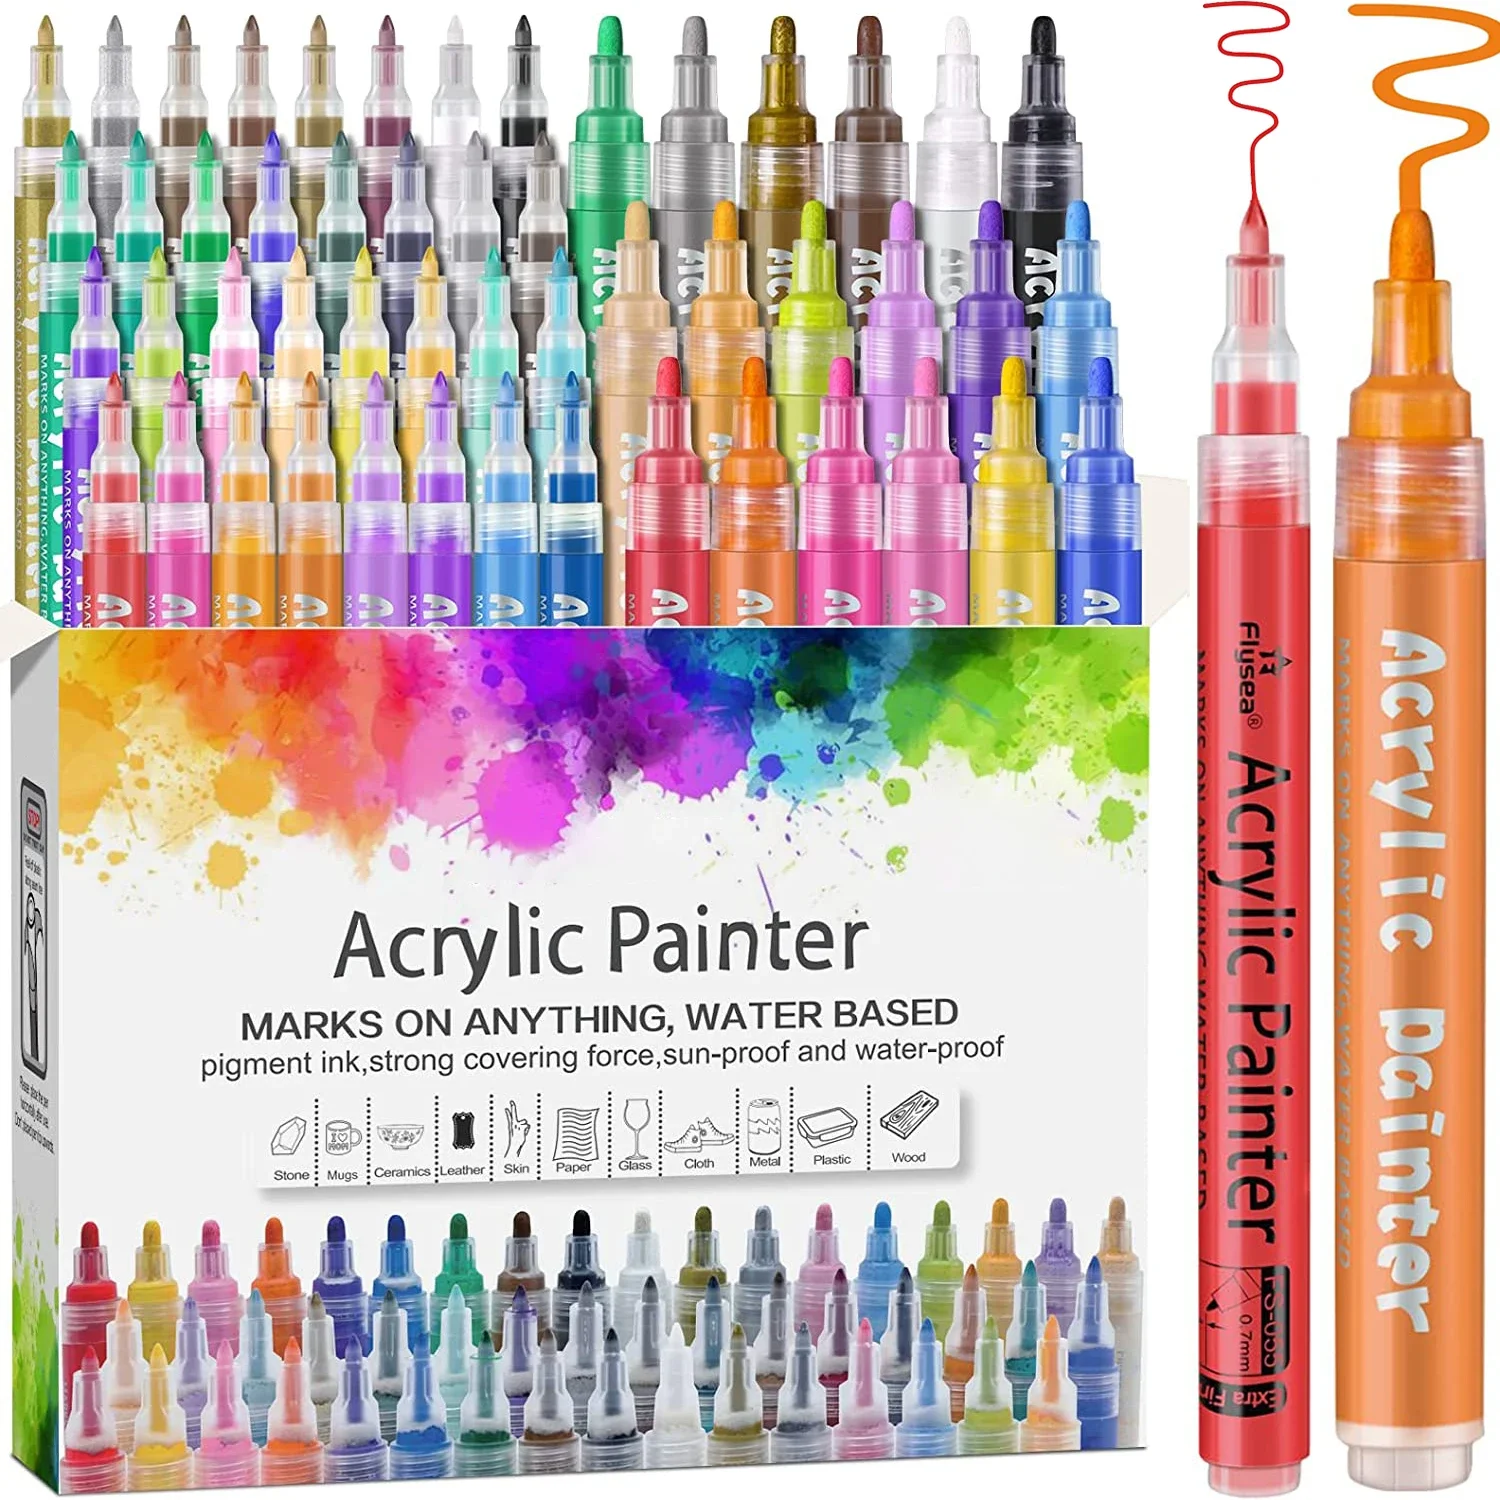 Acrylic Markers, Acrylic Paint Pen Premium Paint Pens Water Based Extra Fine and Medium Tip, Paint Art Markers Set Art Supplies